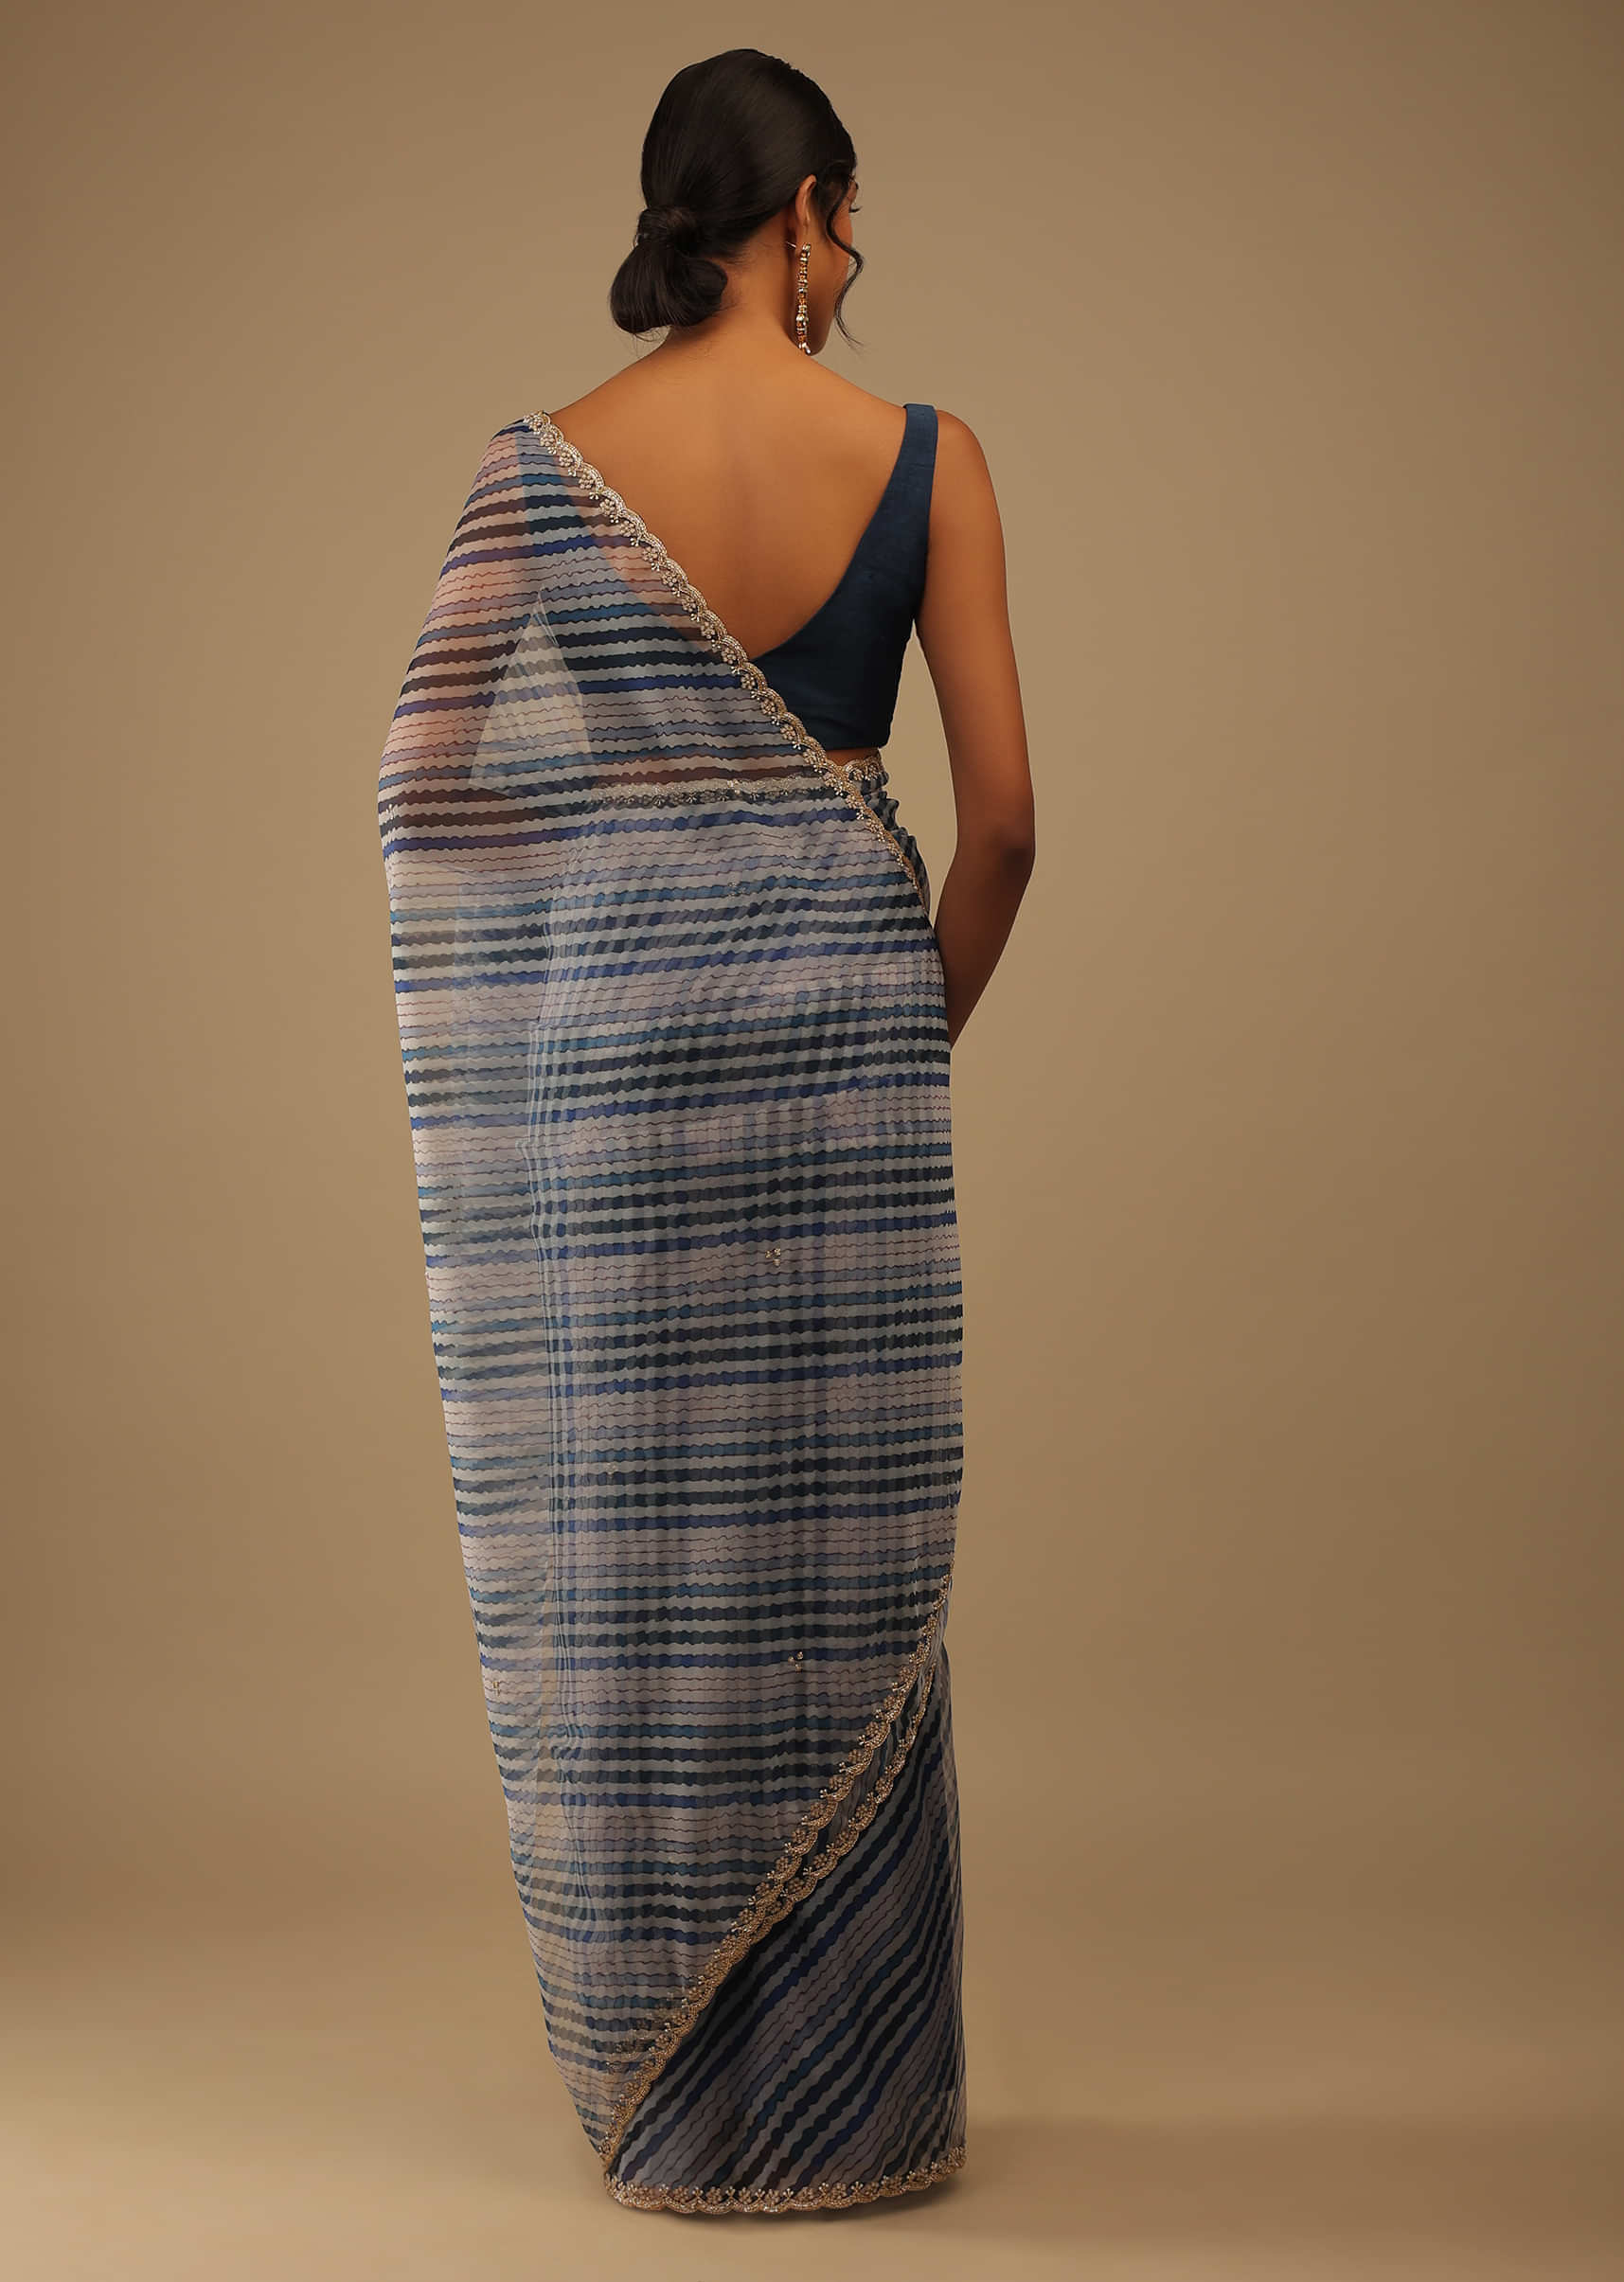 Deep Marine Blue And Black Leheria Print Saree In Moti Embroidery, Crafted In Organza With Moti Embroidery Floral Buttis 